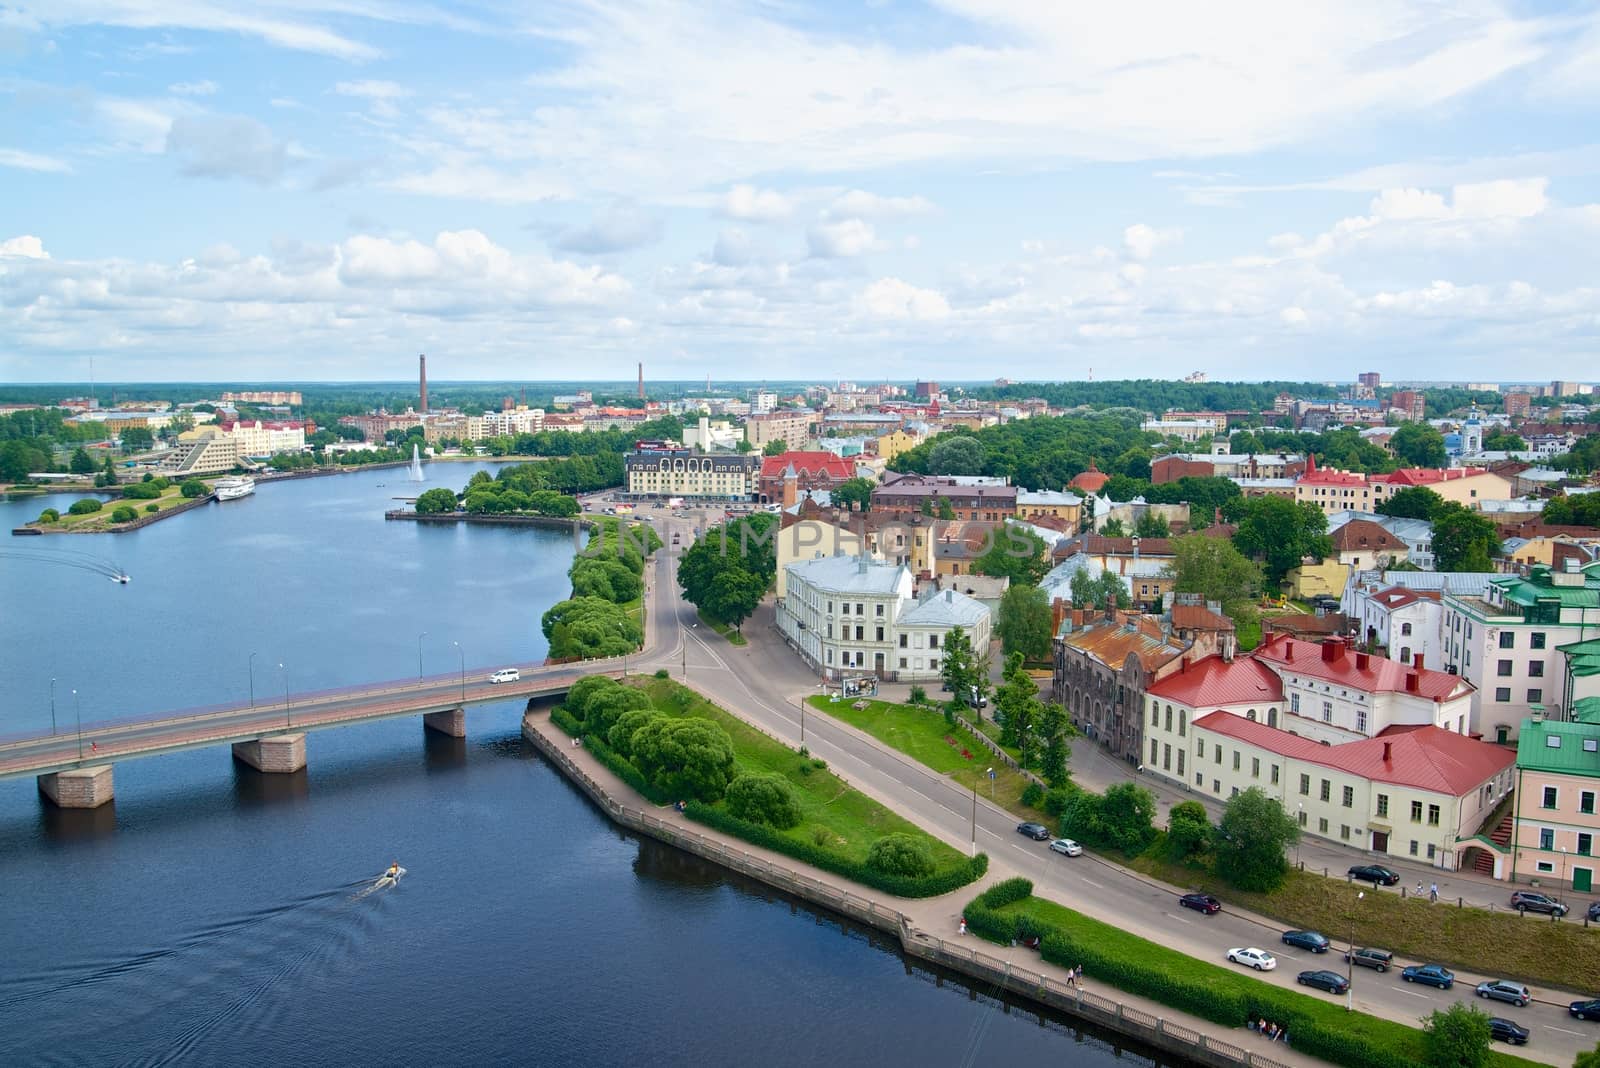 The picture of the  vyborg olaf tower view